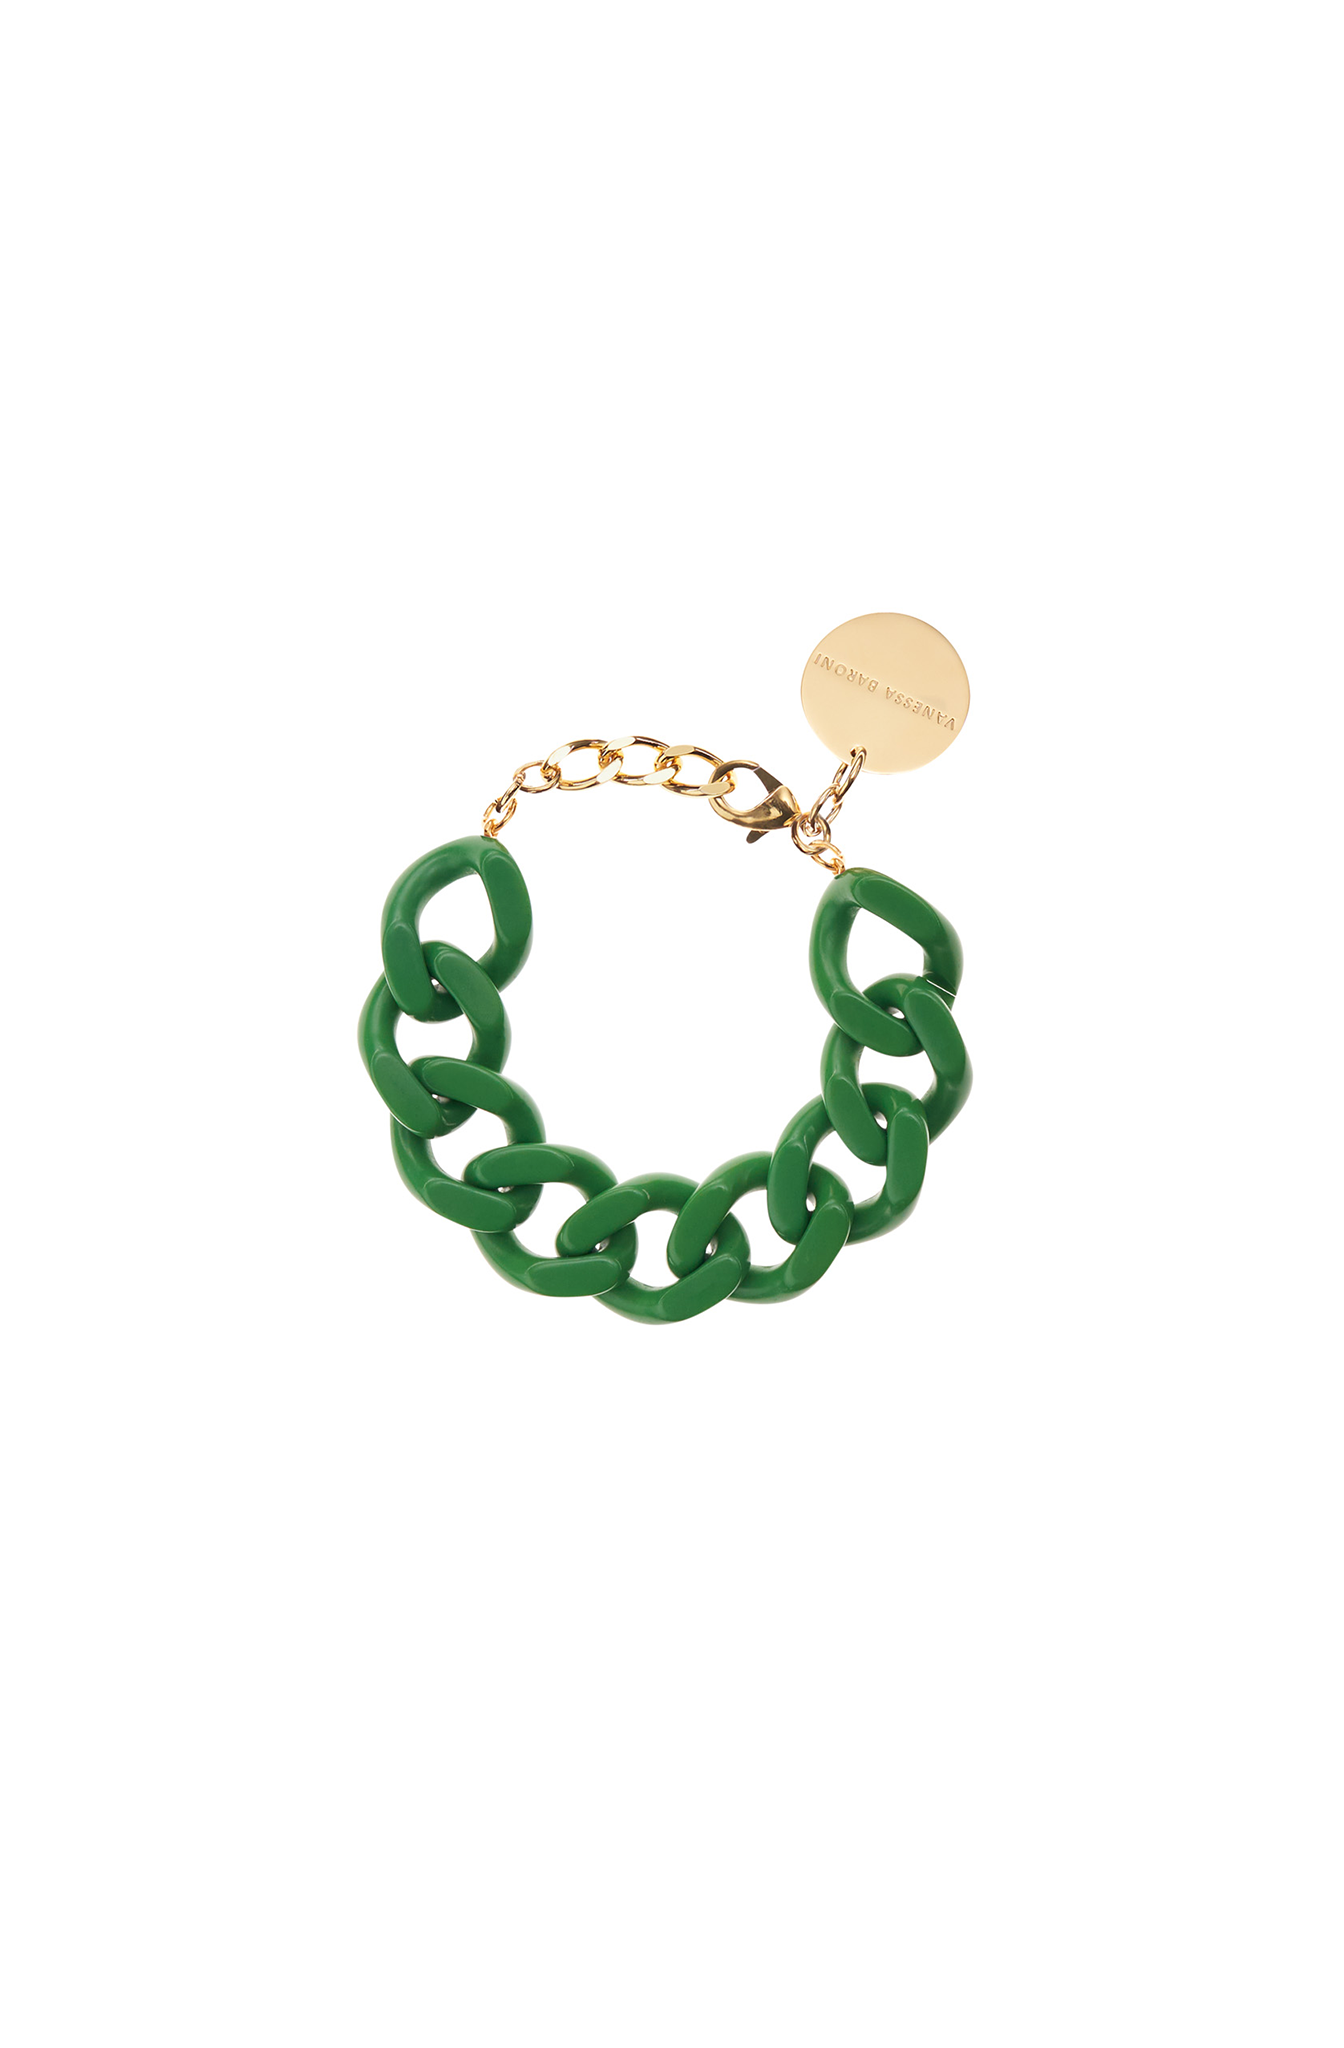 wemon's chunky chain bracelet in green and gold. As powerful as it is reserved. This bracelet is a companion for moments of all kinds. Opulent and feather-light acetate links nestle delicately around your wrist without you noticing.   Made in Italy. Measurements: Length: 20 to 22 cm (adjustable) Width: approx. 2 cm Weight: approx. 30 g - very light and hardly noticeable when worn!